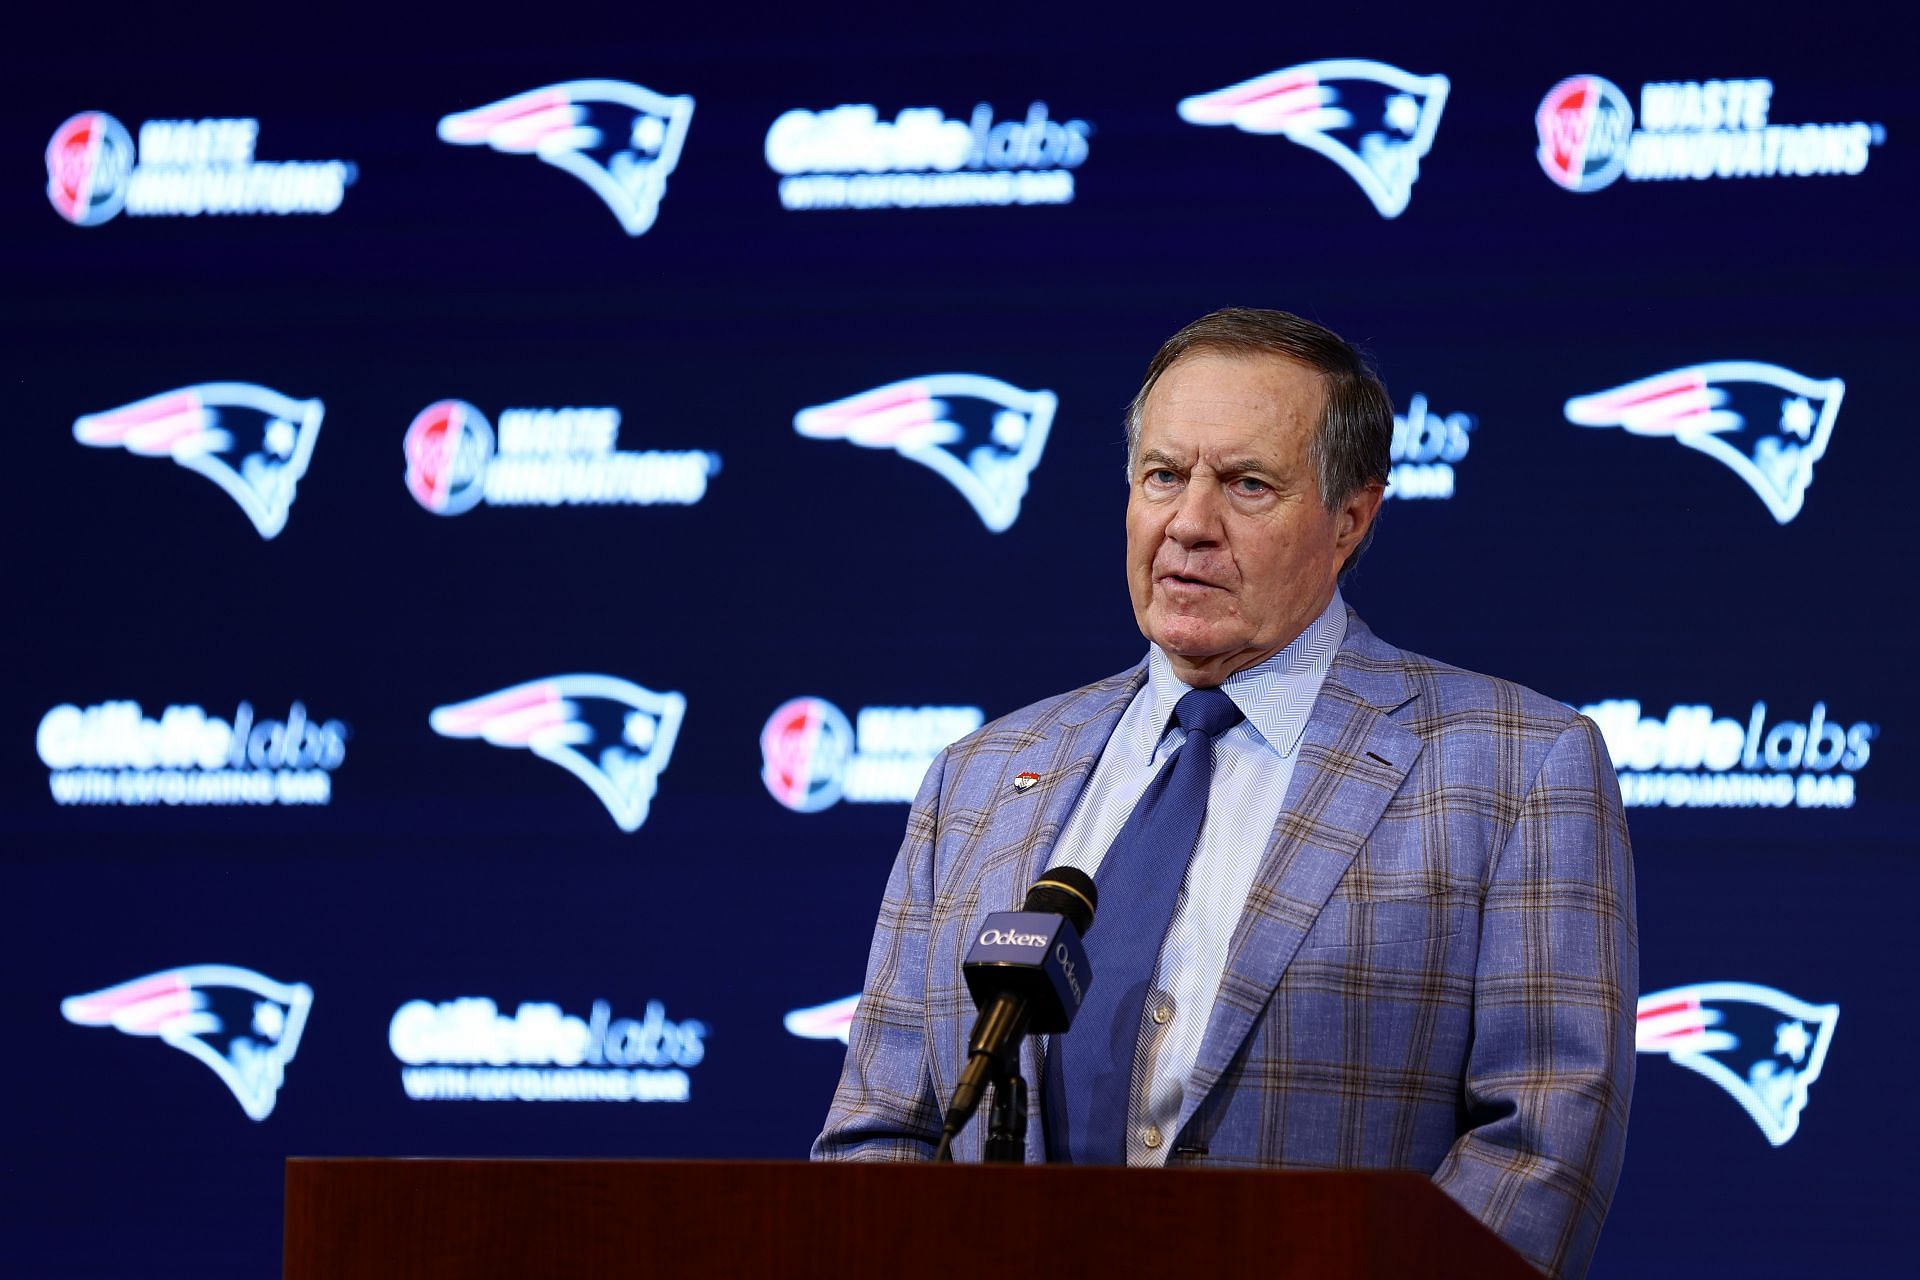 Bill Belichick during his New England Patriots Press Conference